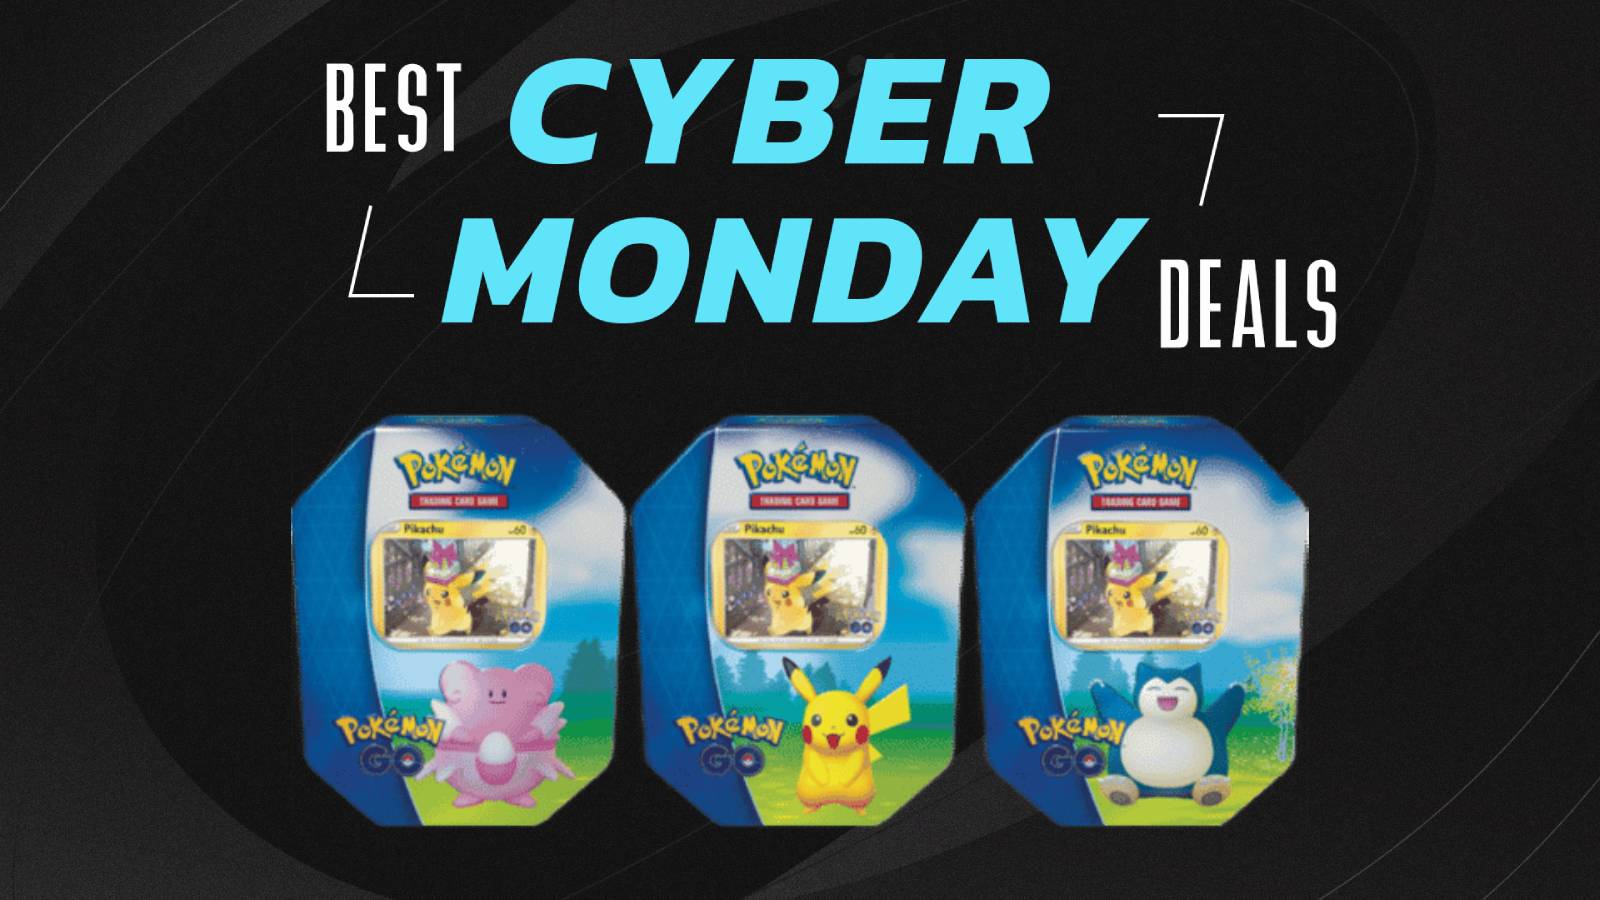 A series of Pokemon TCG Pokemon Go Gift Tins are pictured below text saying Best Cyber Monday Deals